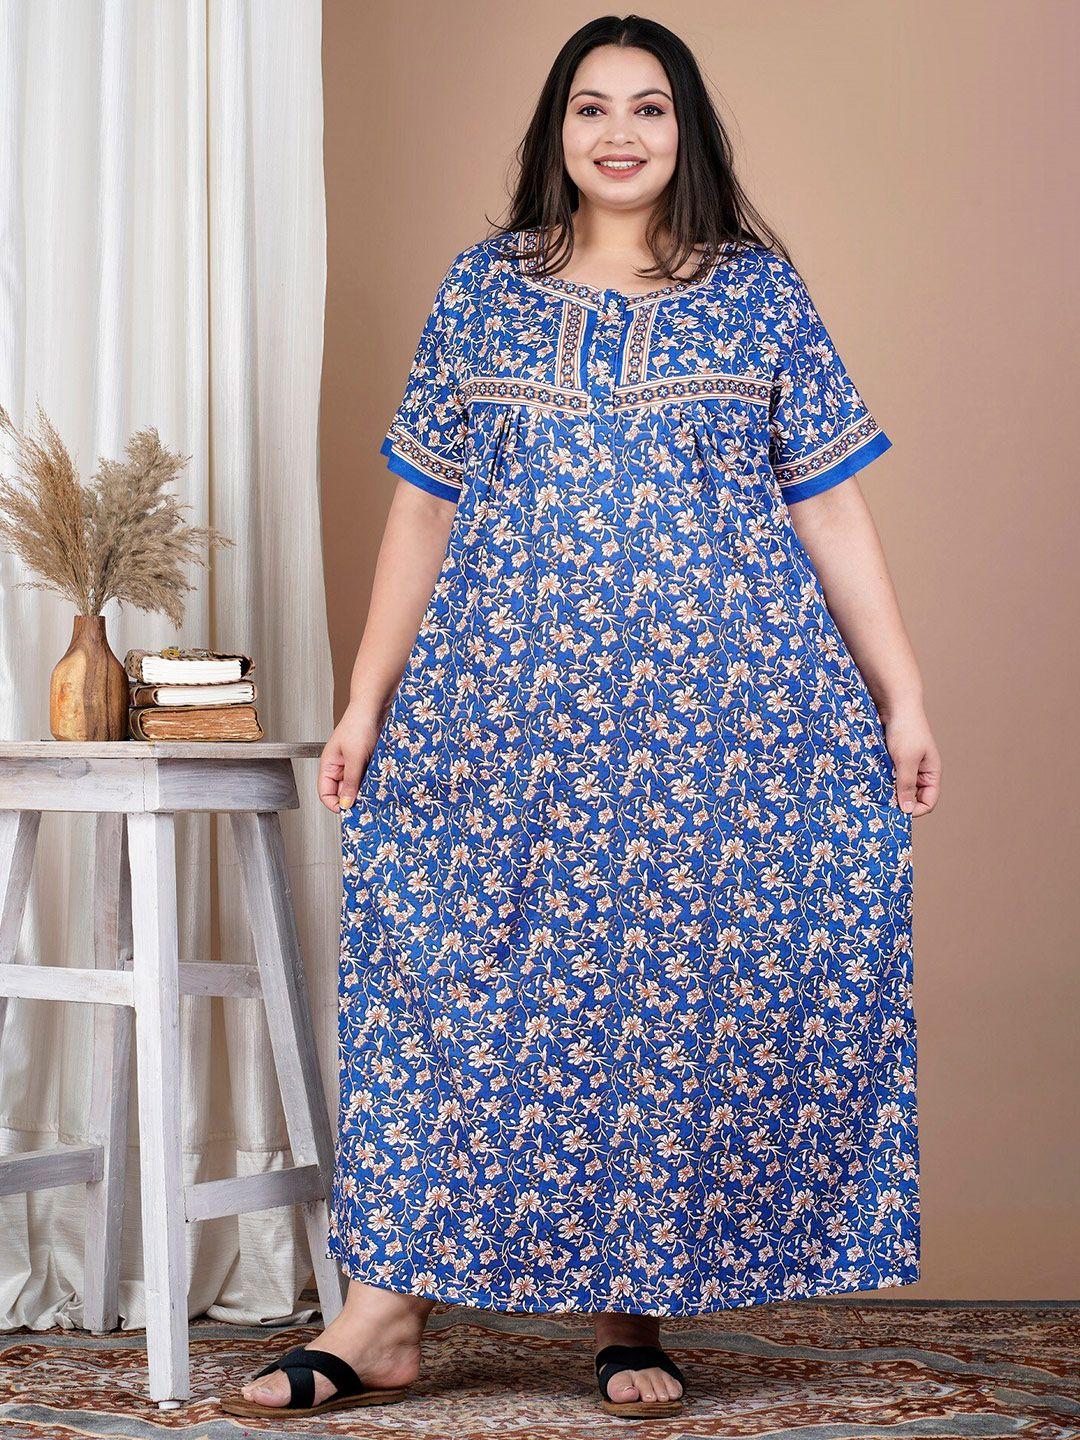 sp designs plus size floral printed pure cotton maxi nightdress